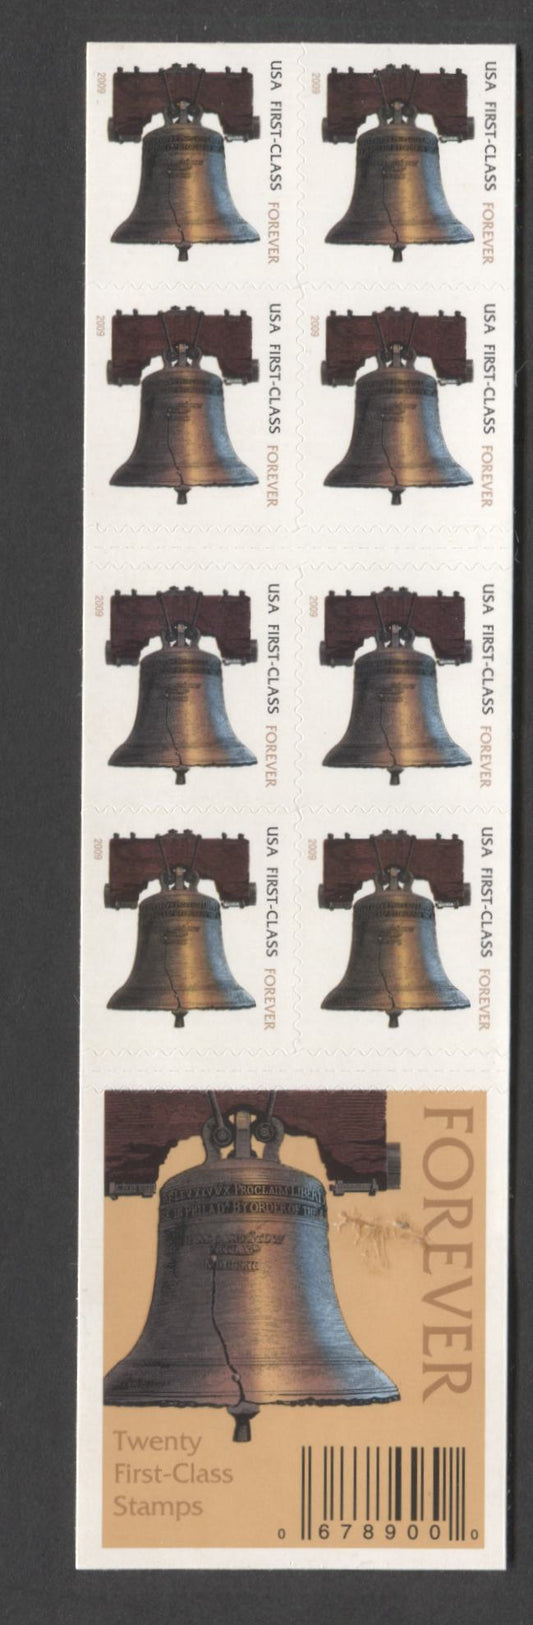 Lot 30 United States SC#4127J First Class Multicolored 2008 Liberty Bell Issue, Double Sided Booklet, Dated 2009 In Copper, A VFNH Booklet Of 20, Click on Listing to See ALL Pictures, 2017 Scott Cat. $18